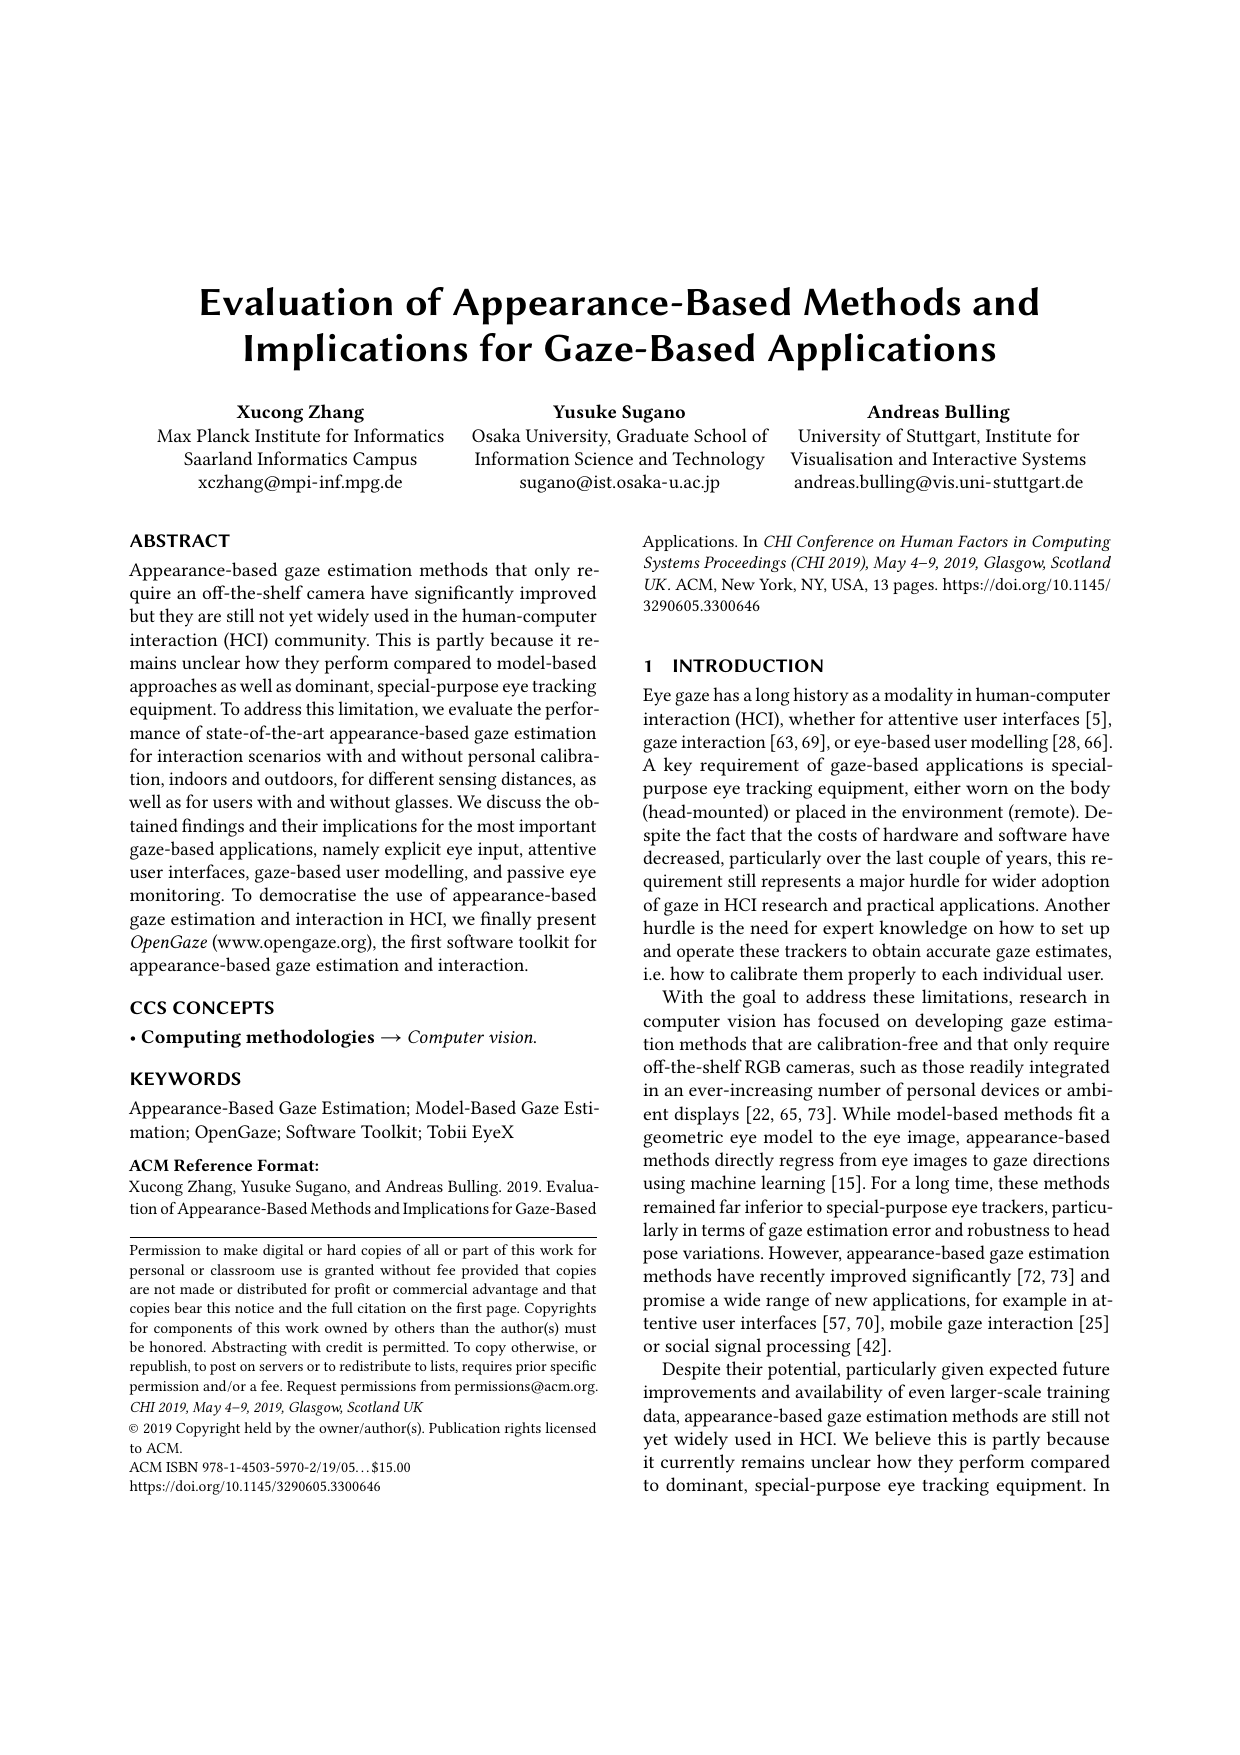 Evaluation of Appearance-Based Methods and Implications for Gaze-Based Applications